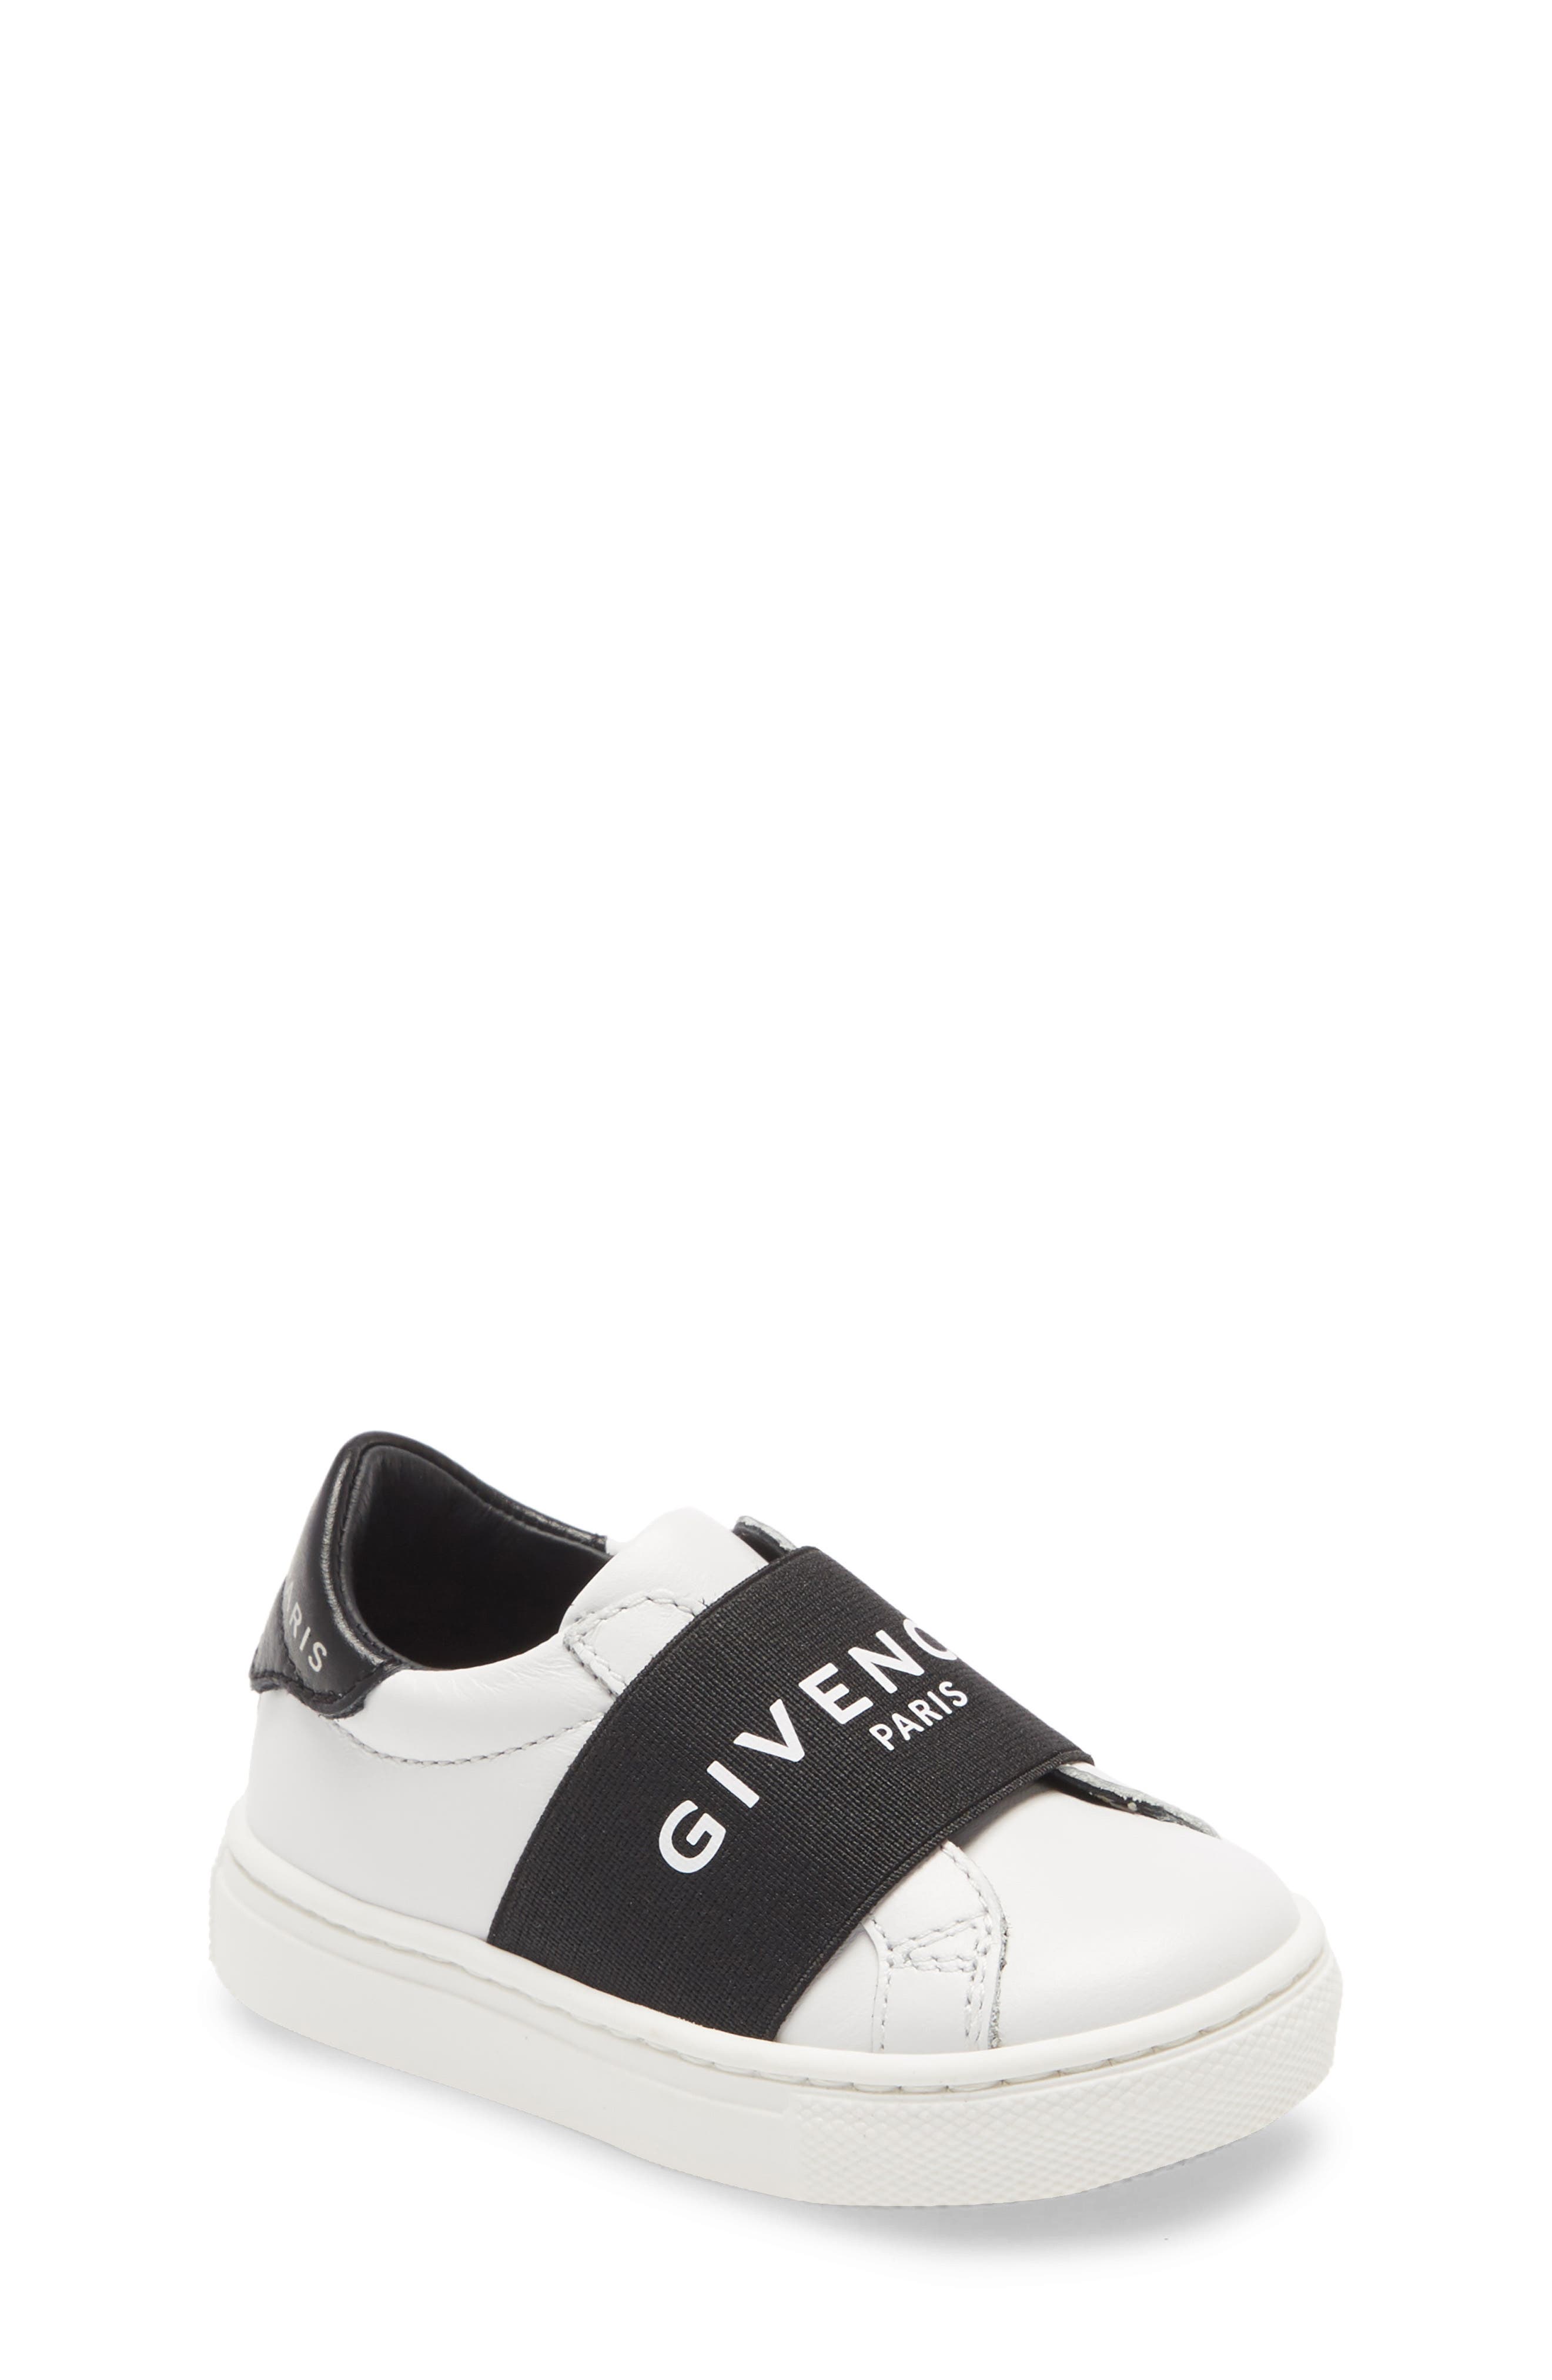 All Boys' Givenchy Sale | Nordstrom